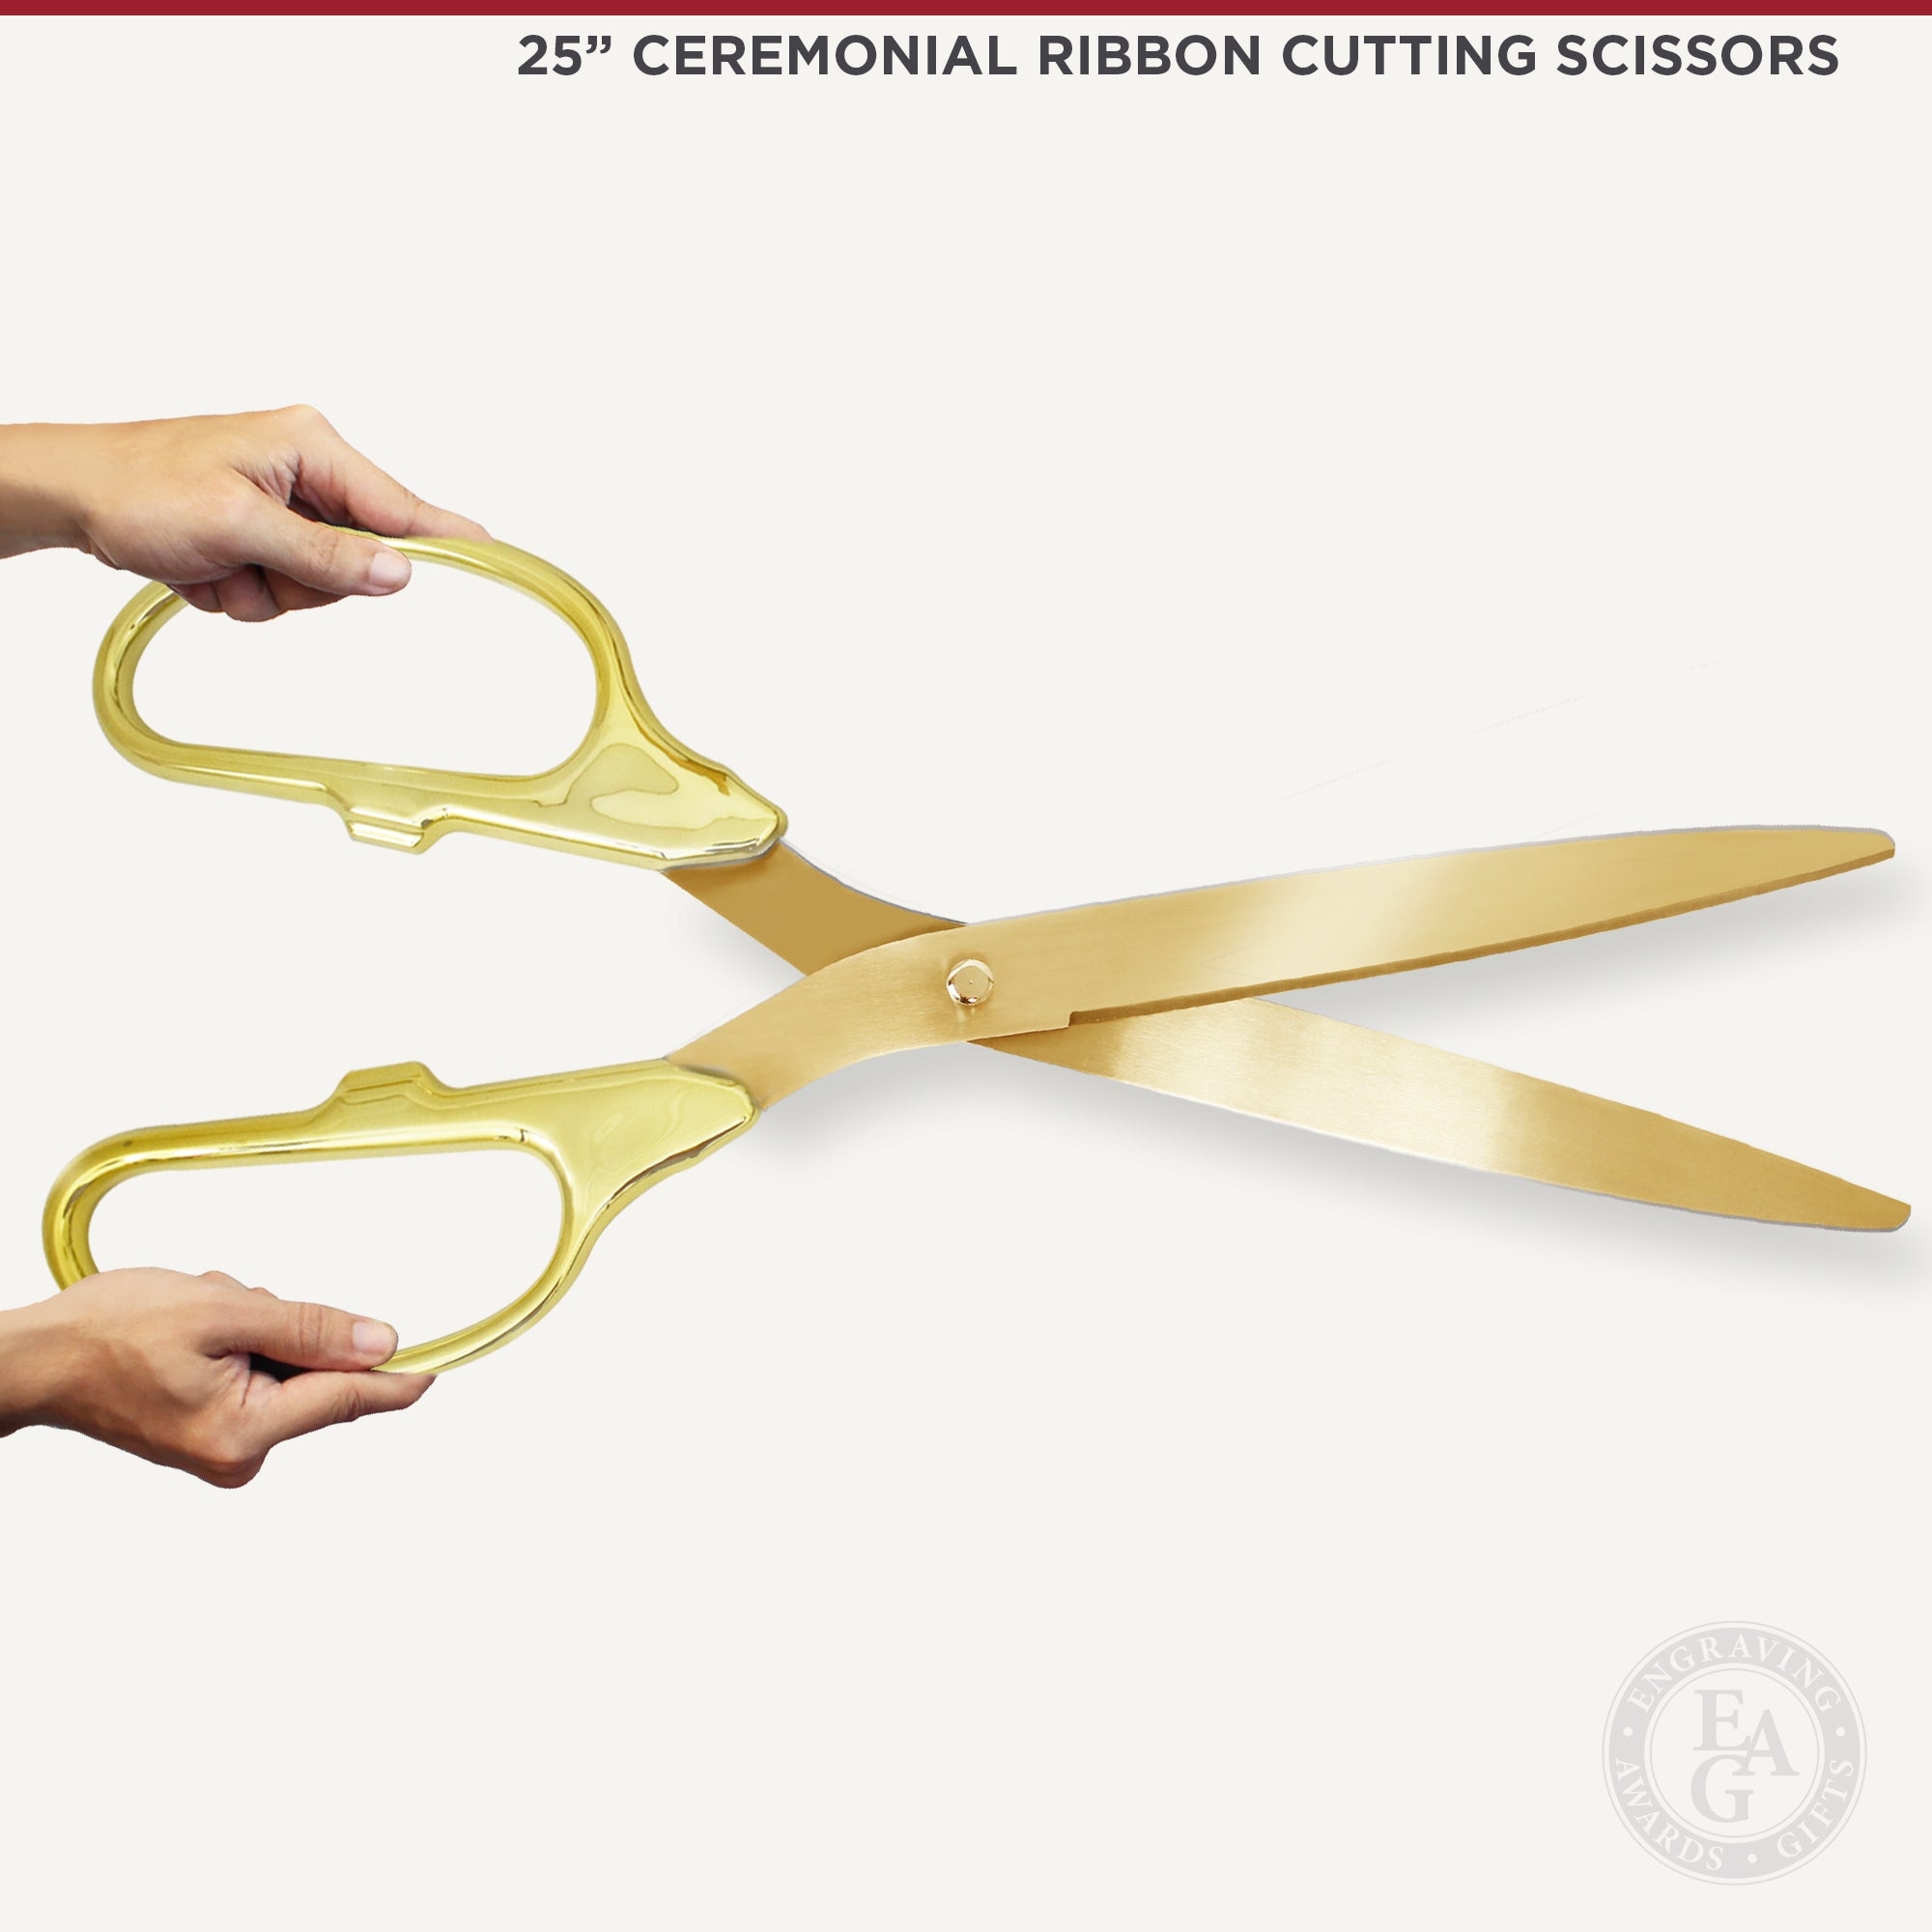 Grand Opening Red Ribbon Cutting Ceremony Kit - 25 Giant Scissors with Red  S